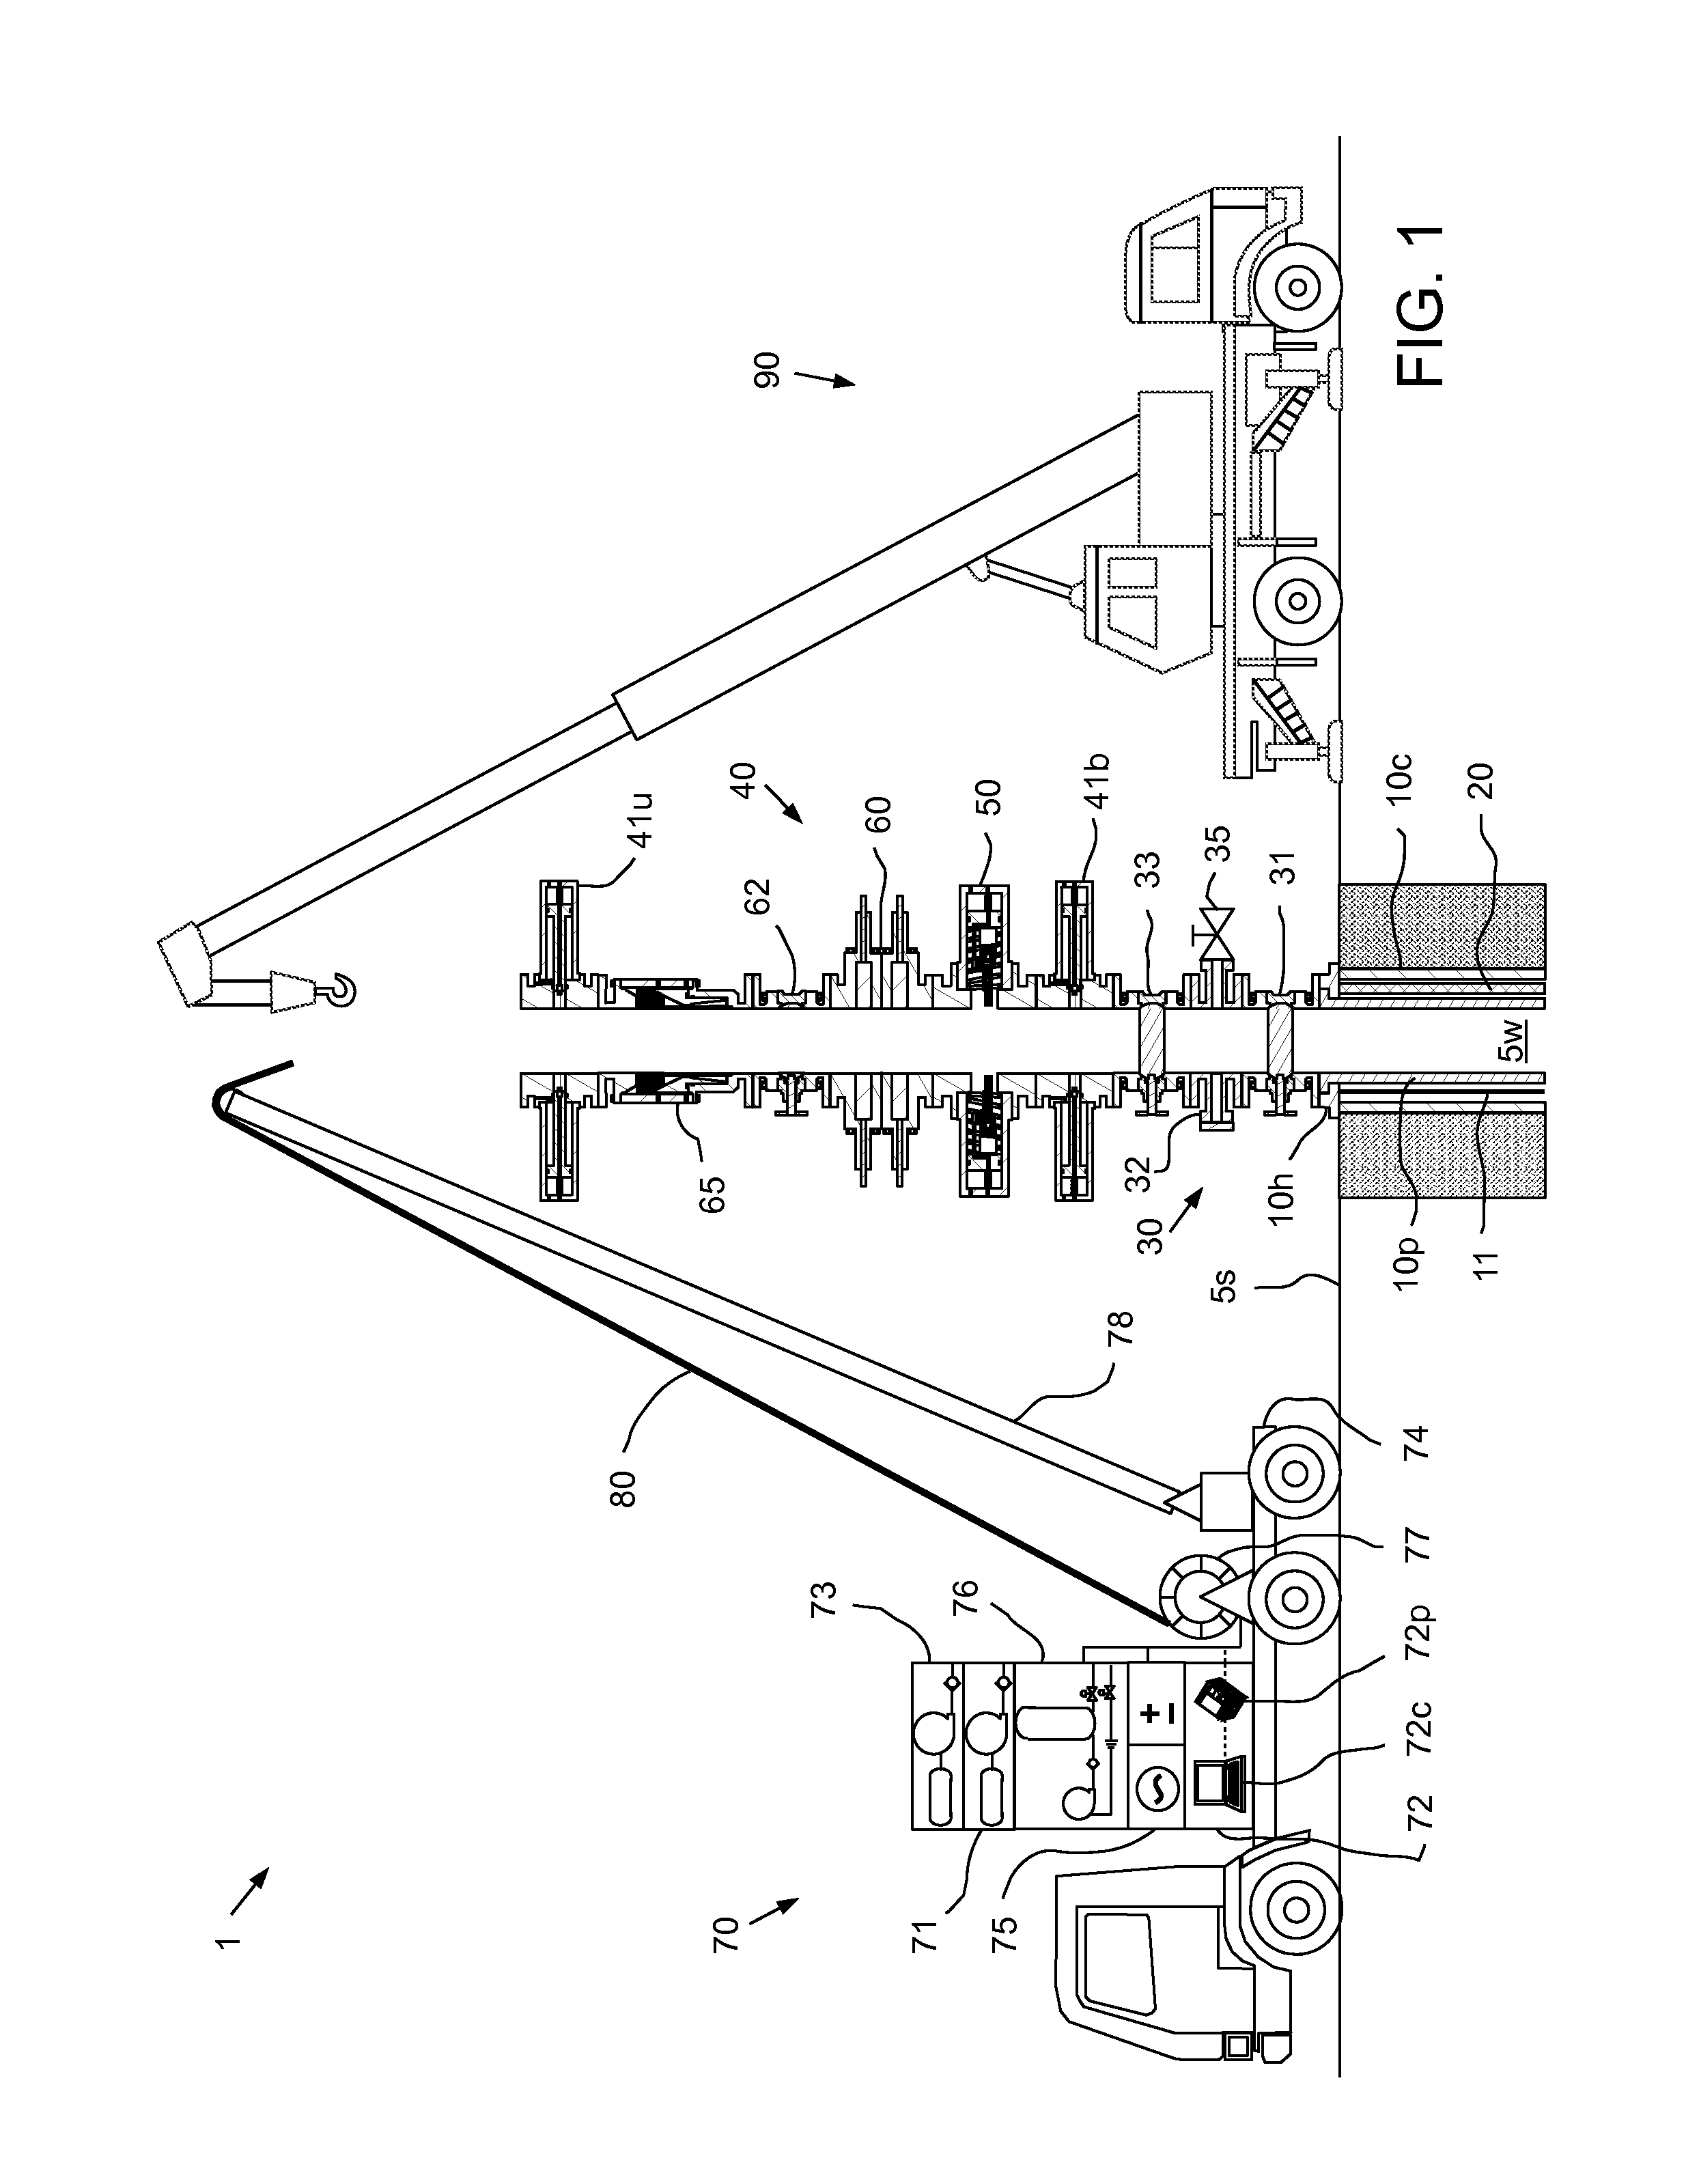 Gradational insertion of an artificial lift system into a live wellbore